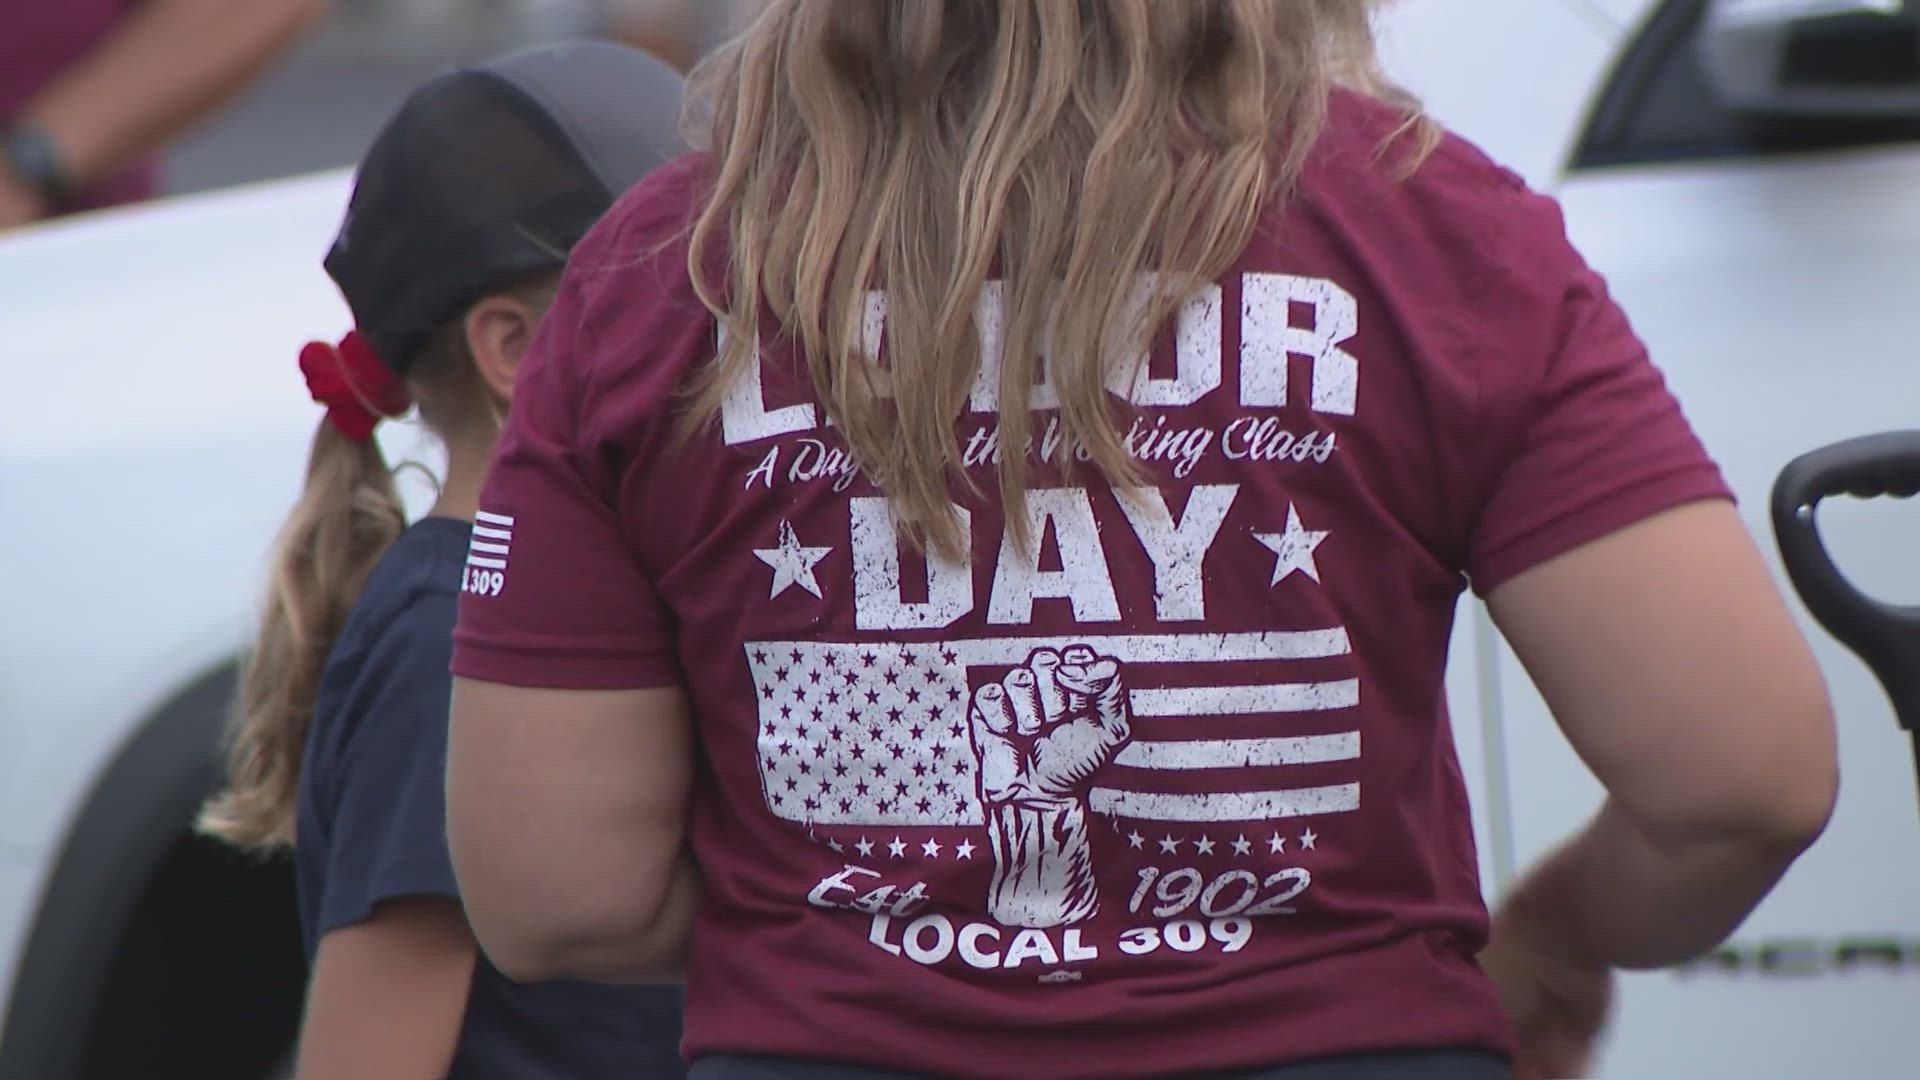 Did you enjoy Labor Day weekend? Take a look at one of the largest Labor Day celebrations in the St. Louis region.